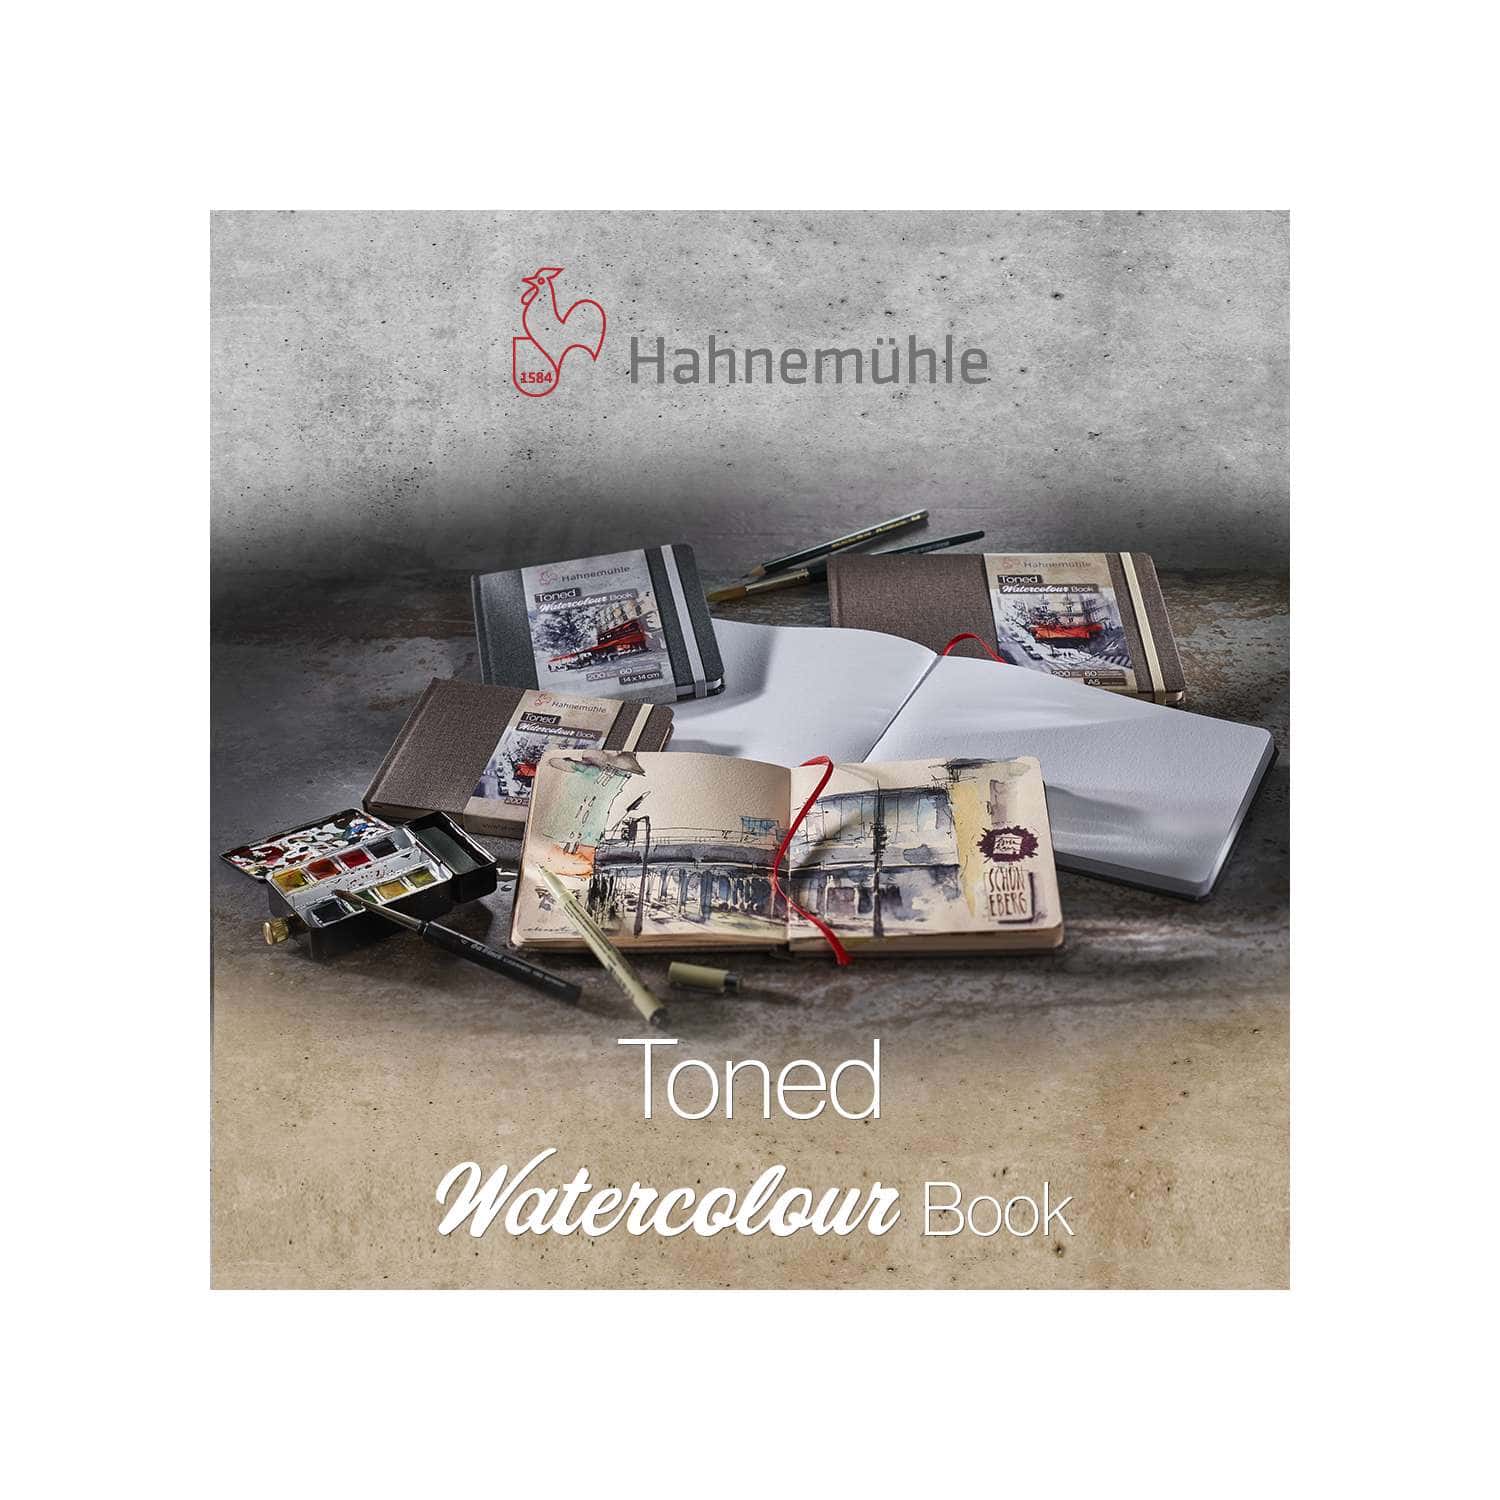  Hahnemuhle 10625172 Toned Watercolour Book, 14cm x 14cm Size,  Grey